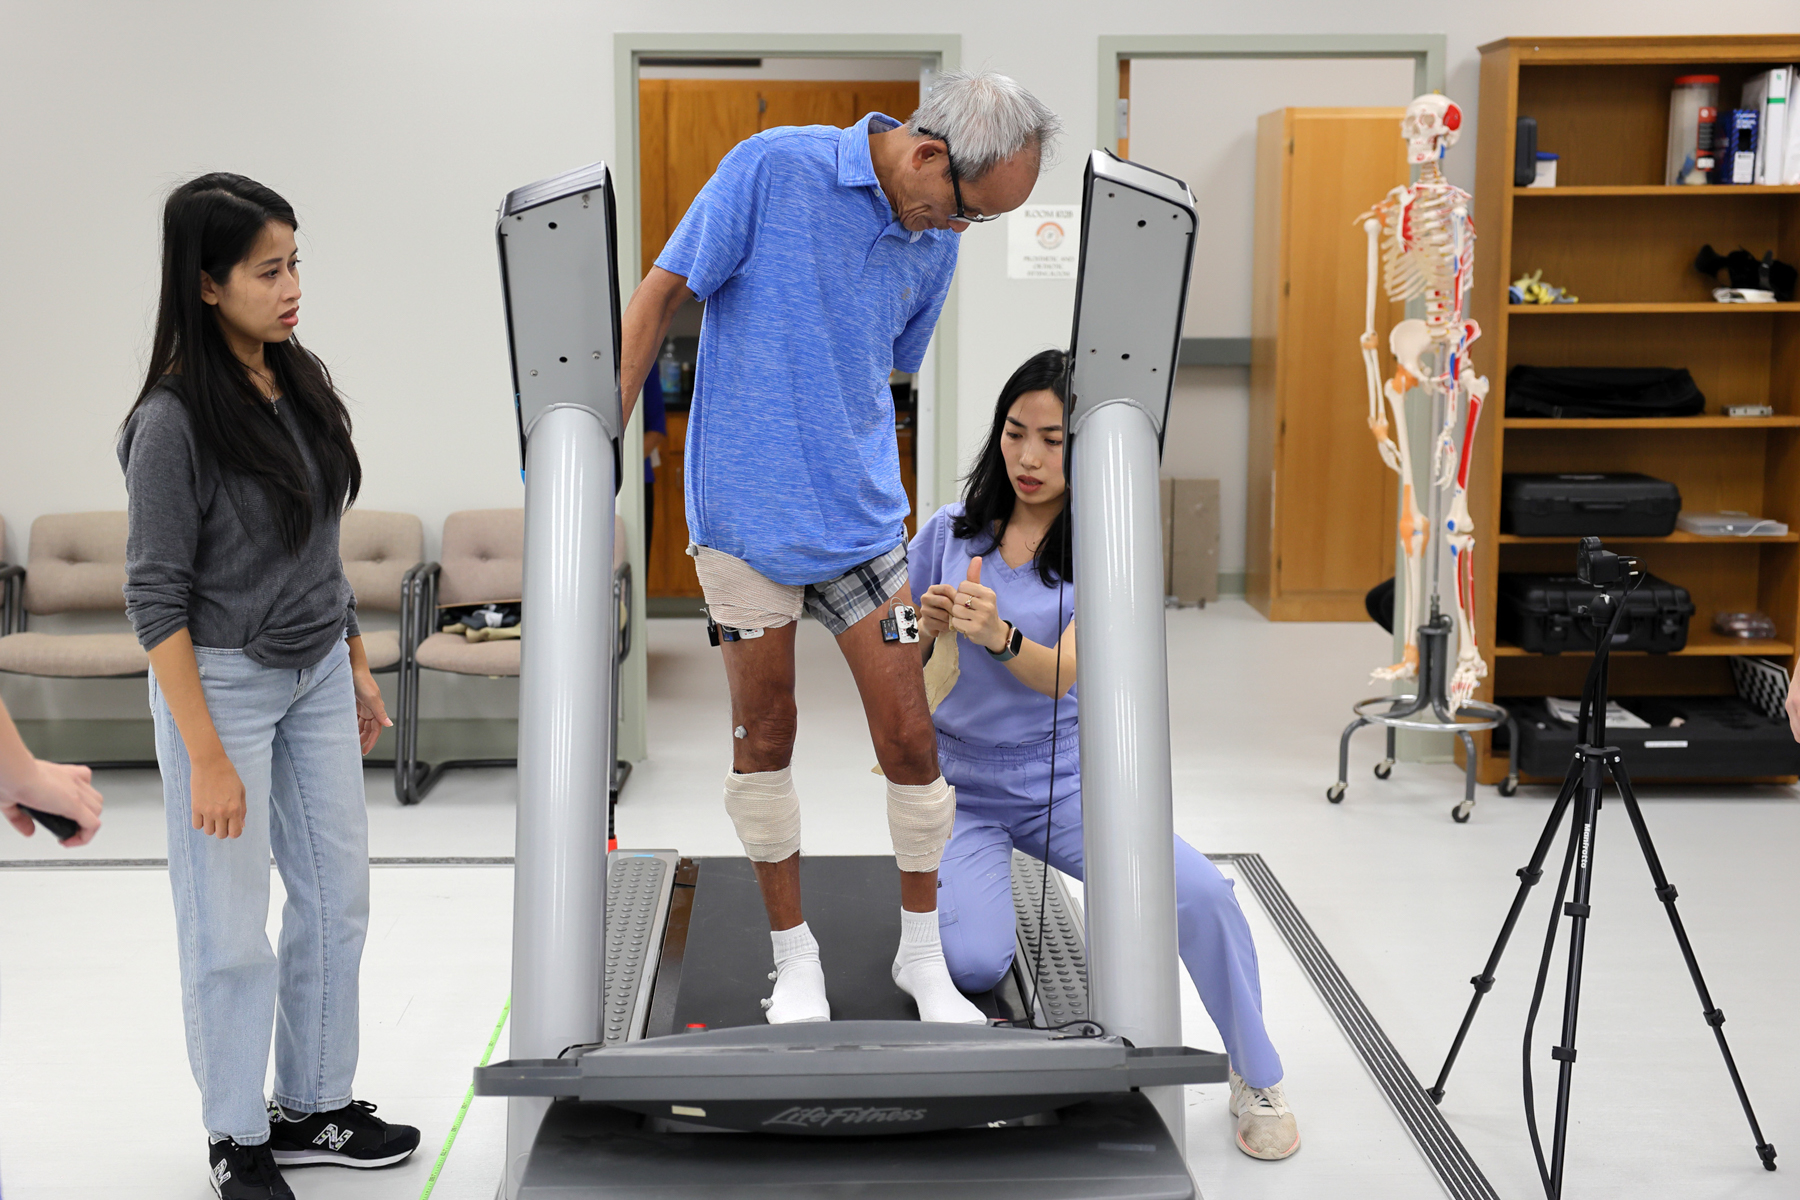 A man stands on a treadmill while a woman in blue scrubs places a bandage on his leg